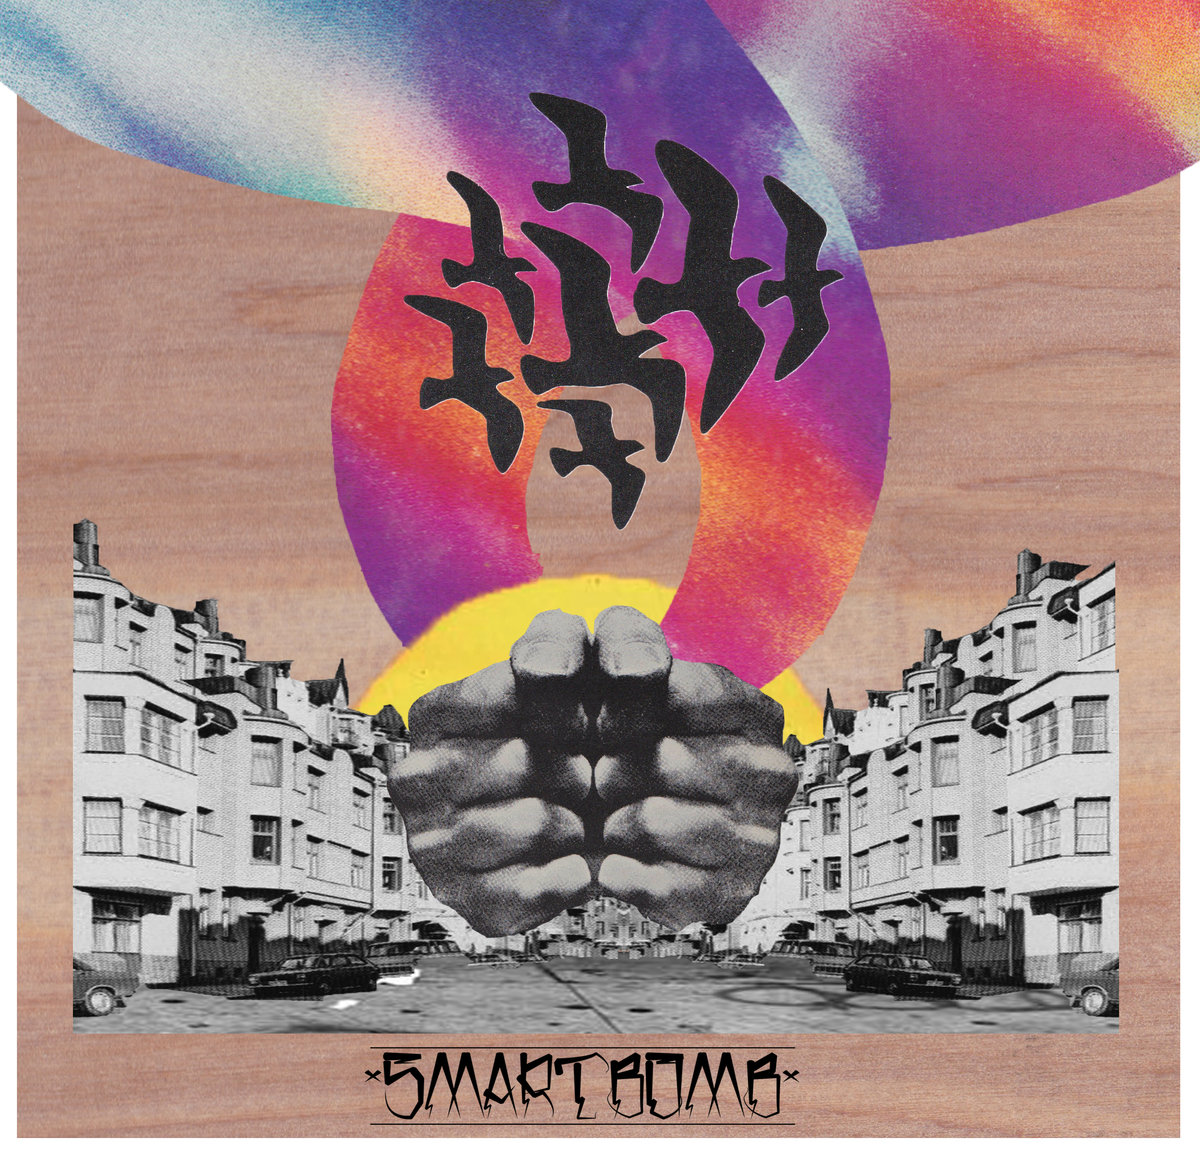 SMART BOMB - "Heart Centered Songs: A Benefit & Tribute Album" (Release)